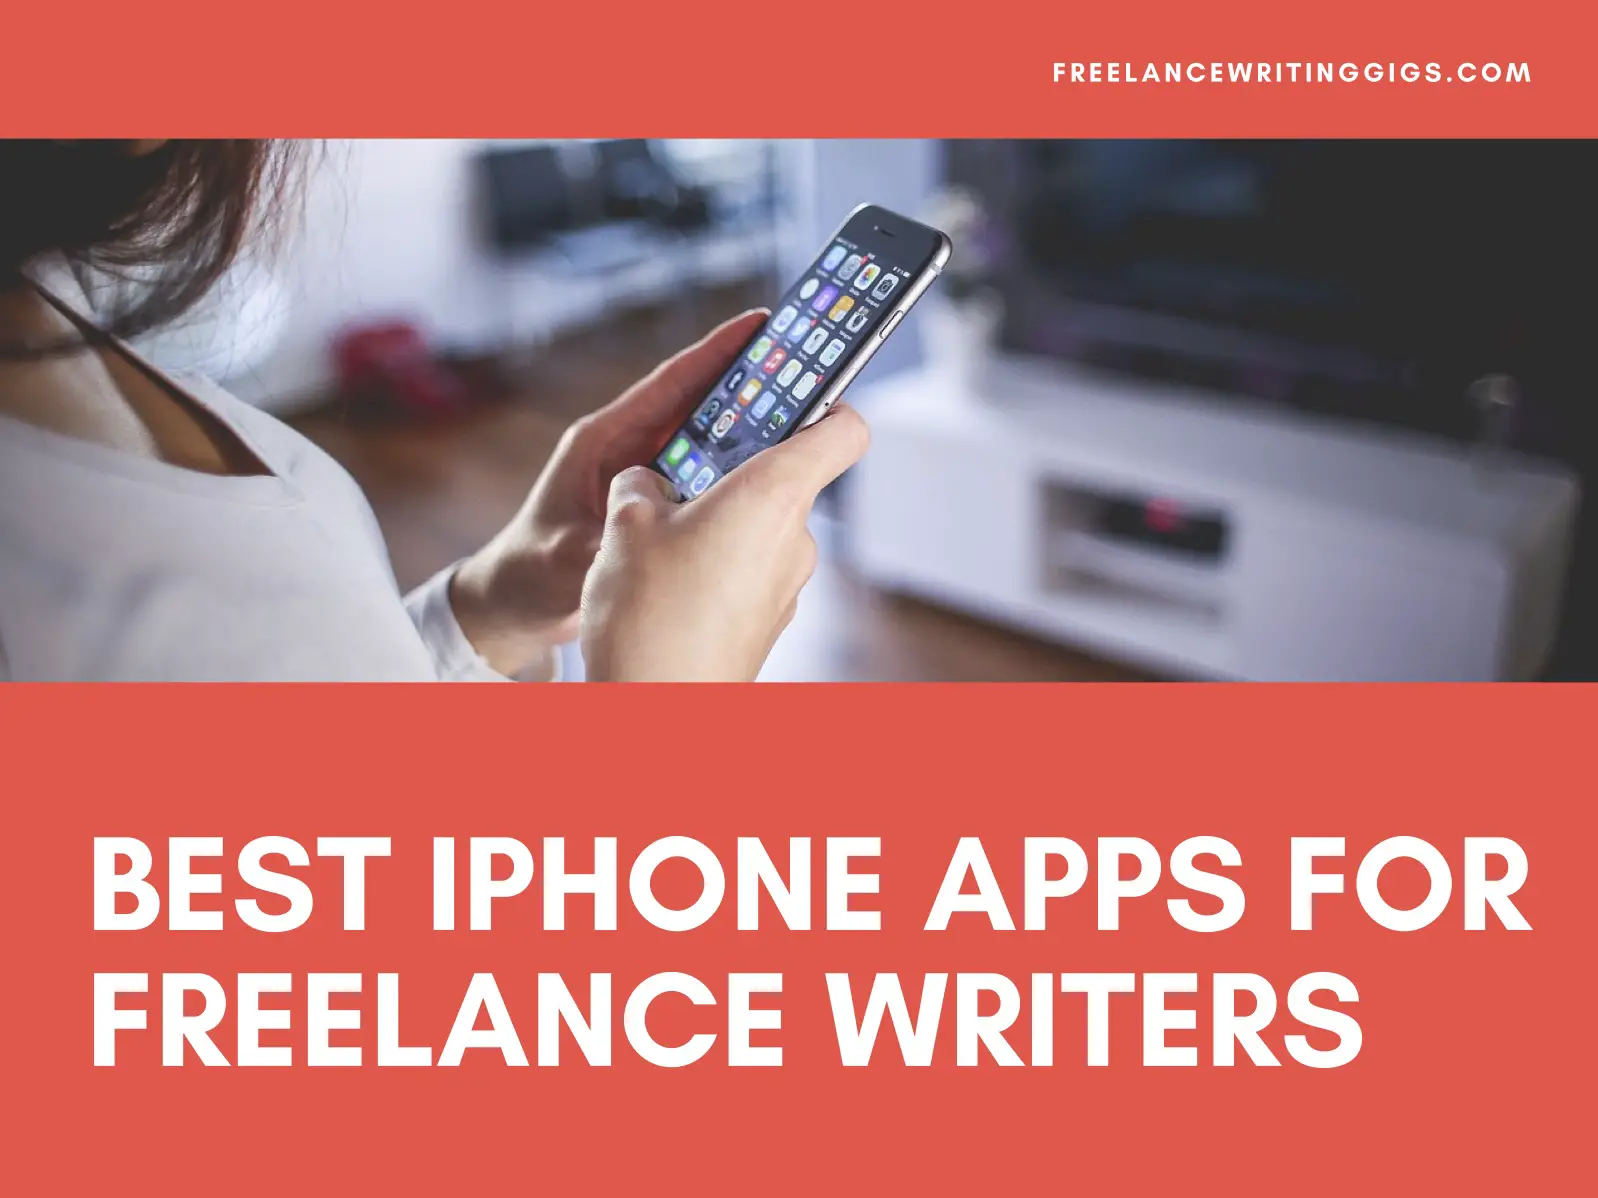 11 Best iPhone Apps for Freelance Writers